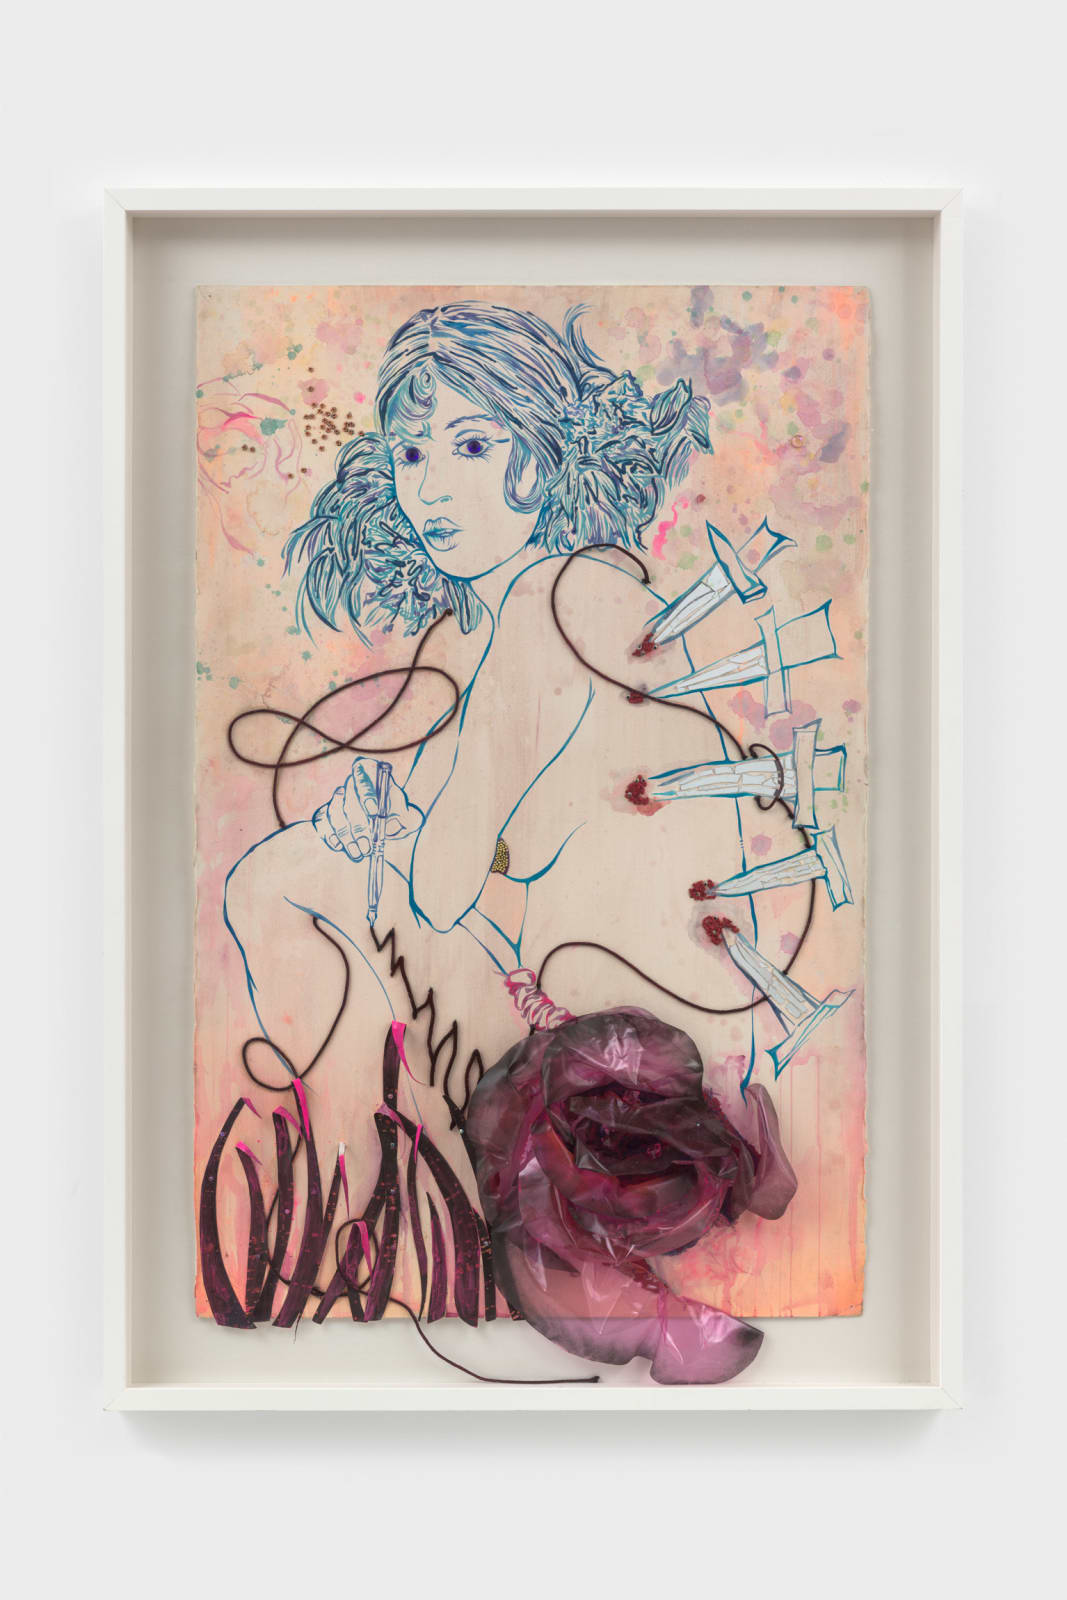 A mixed media on paper presenting a female figure gazing upon the viewer with a curious look. The eyes are made of crystals and their hair flows across the top part of the piece. They hold an ink pen in the right-hand squiggling lines across the surface. Five knifes are stabbed into the body’s shoulder blades and back, revealing a small amount of blood. Towards the hip a large, threedimensional rose takes shape.